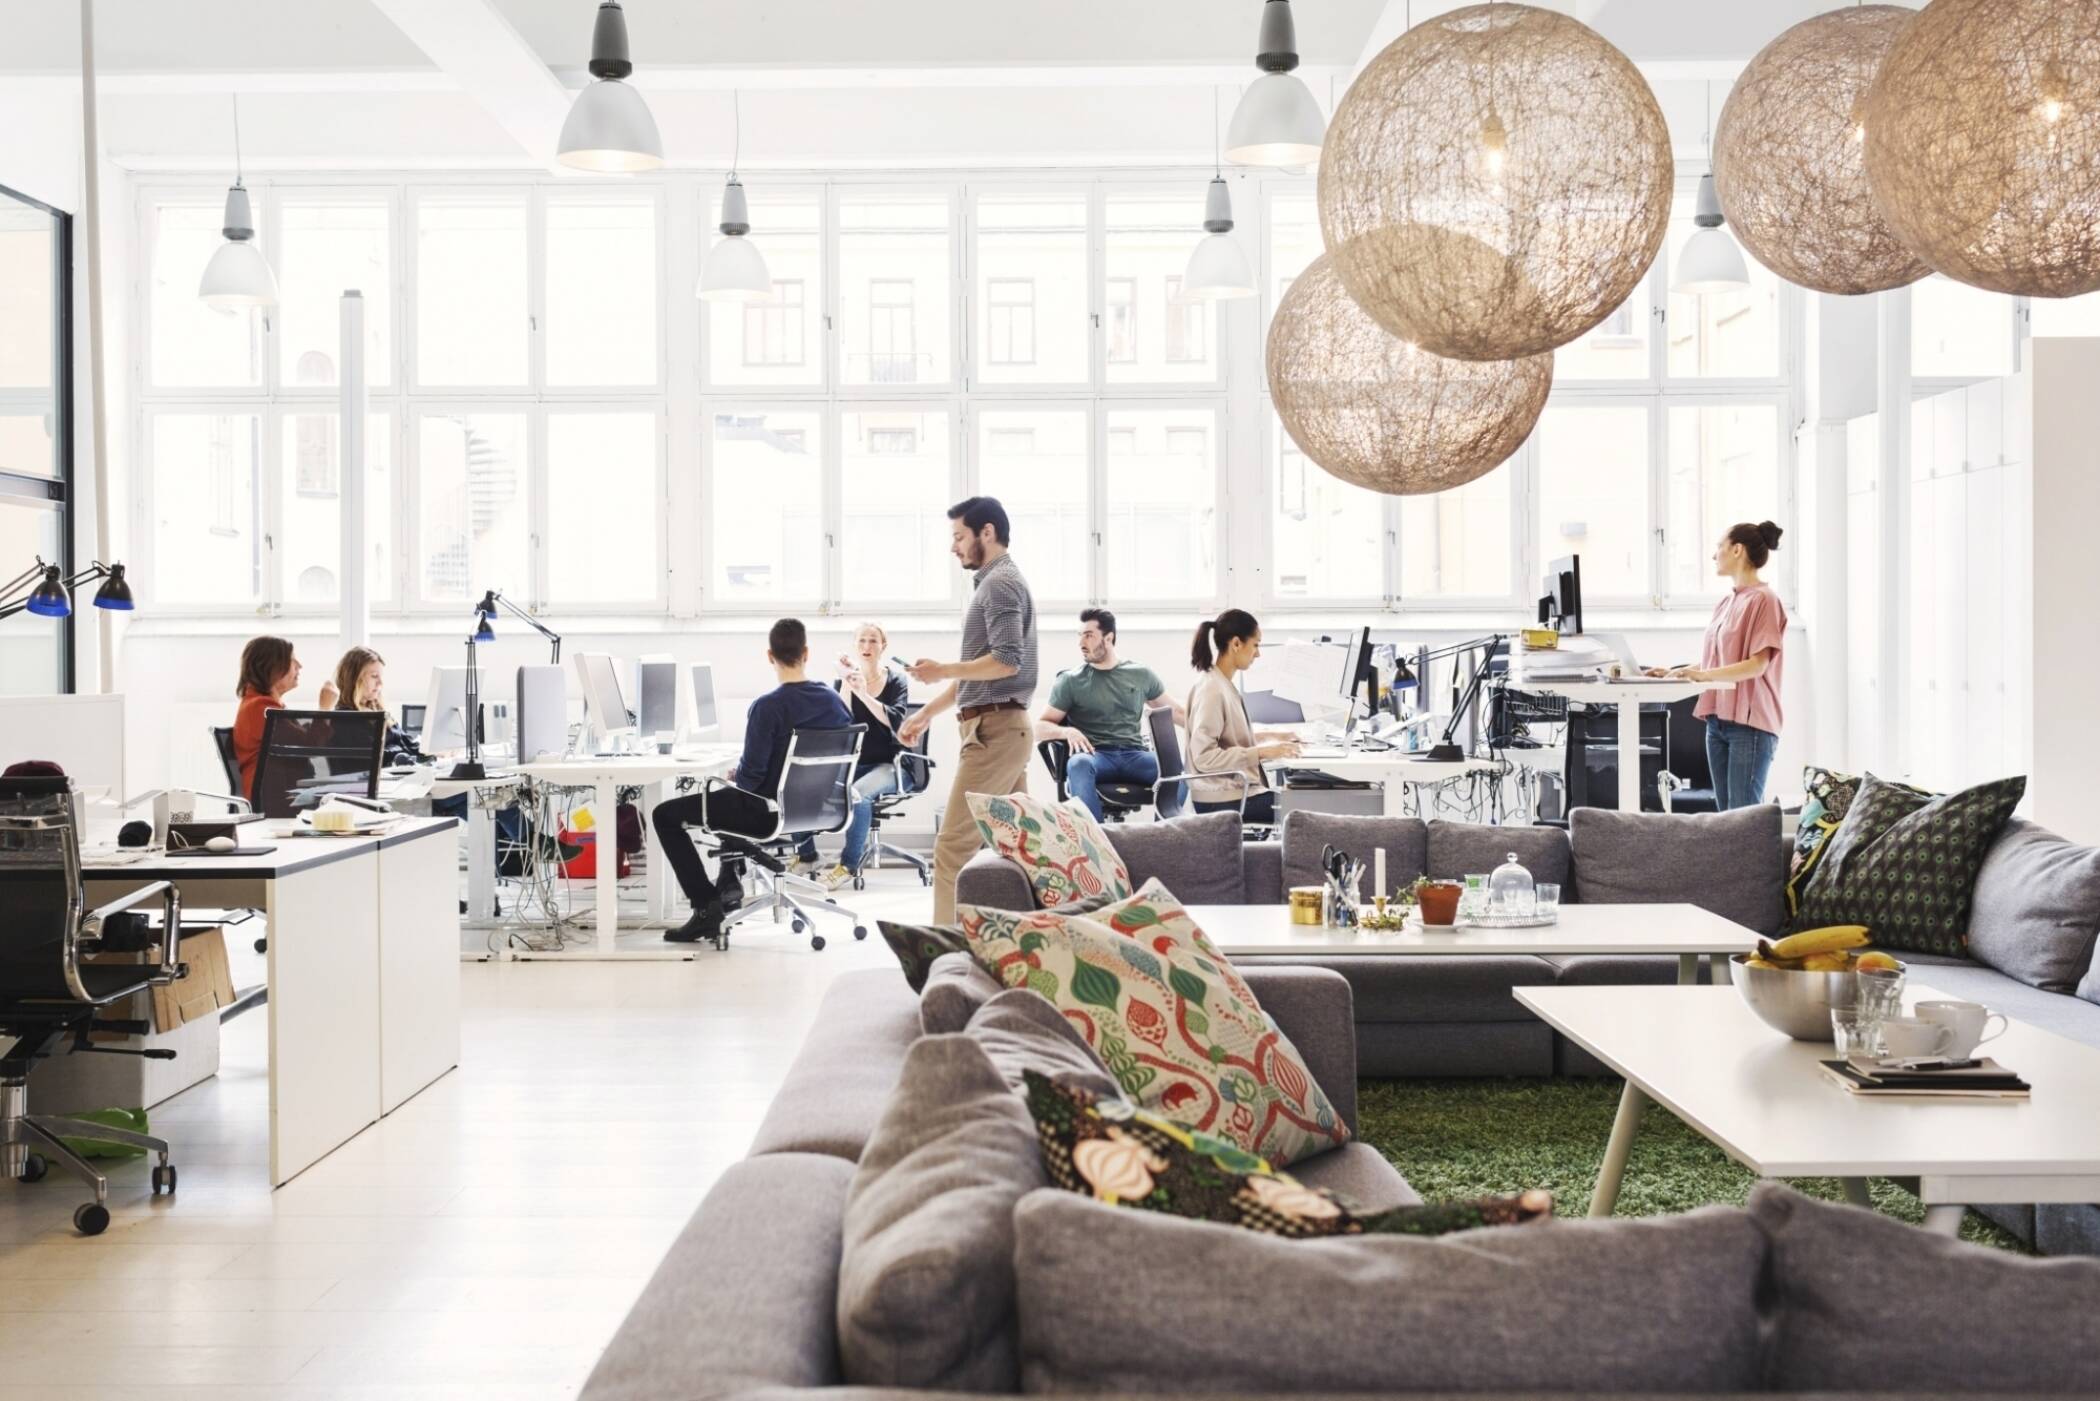 bright modern office with people at desks